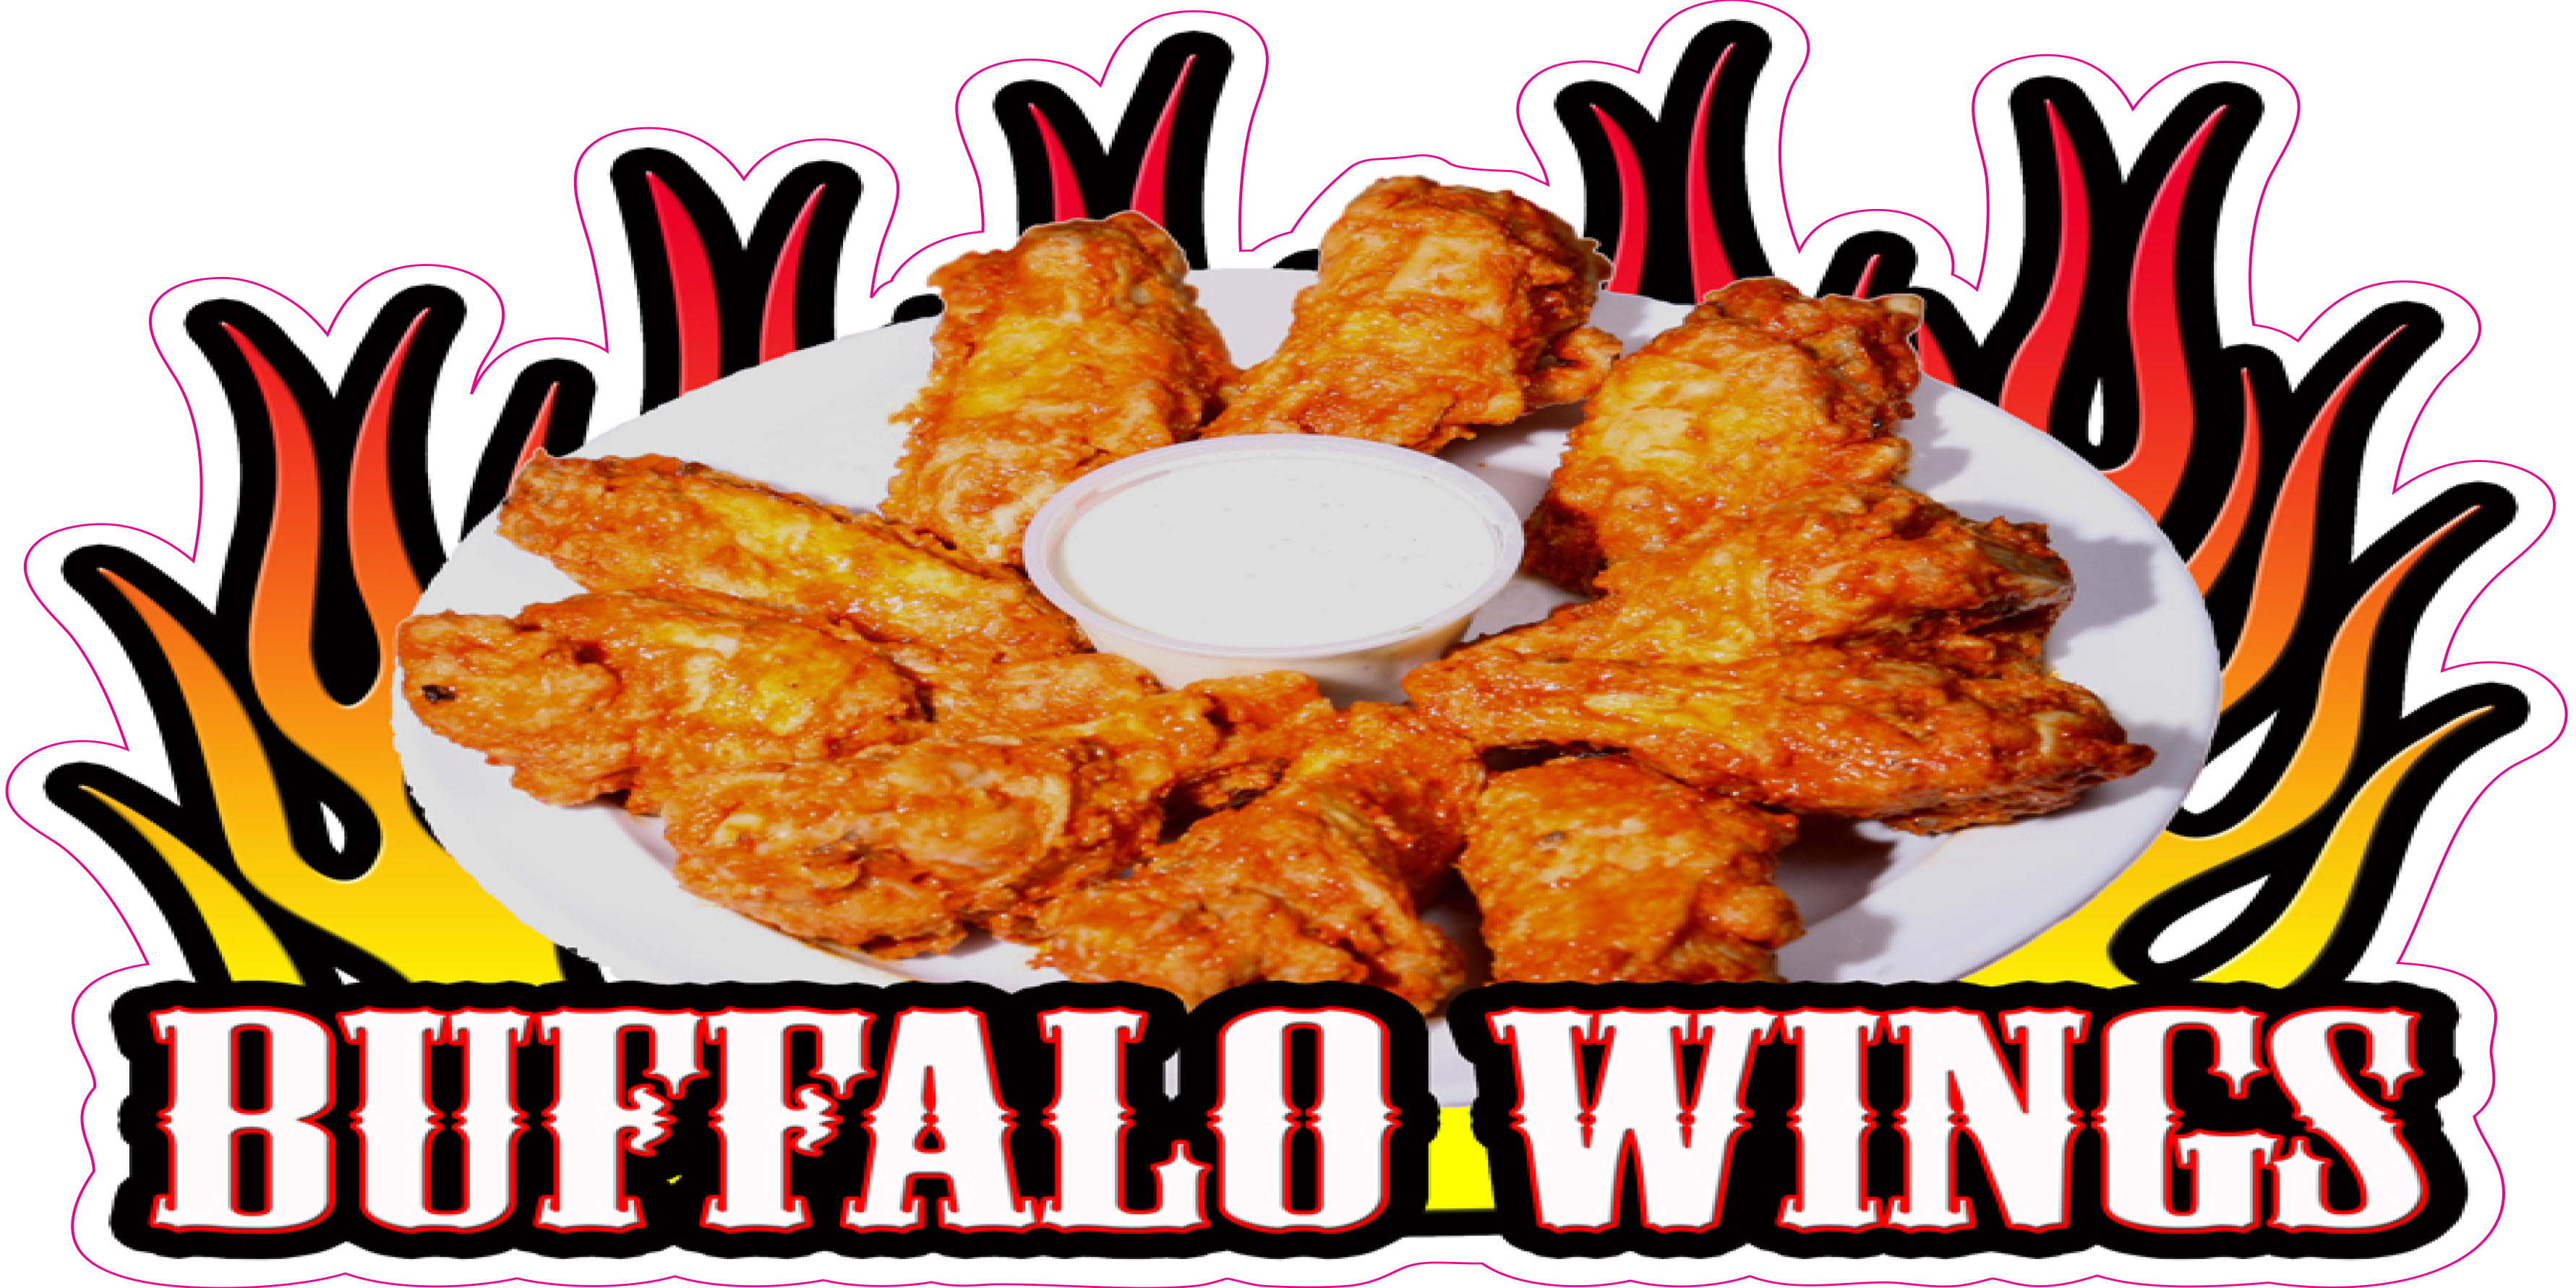 Hot Wings 14" Decal Chicken Concession Restaurant Food Truck Menu Sign Sticker 